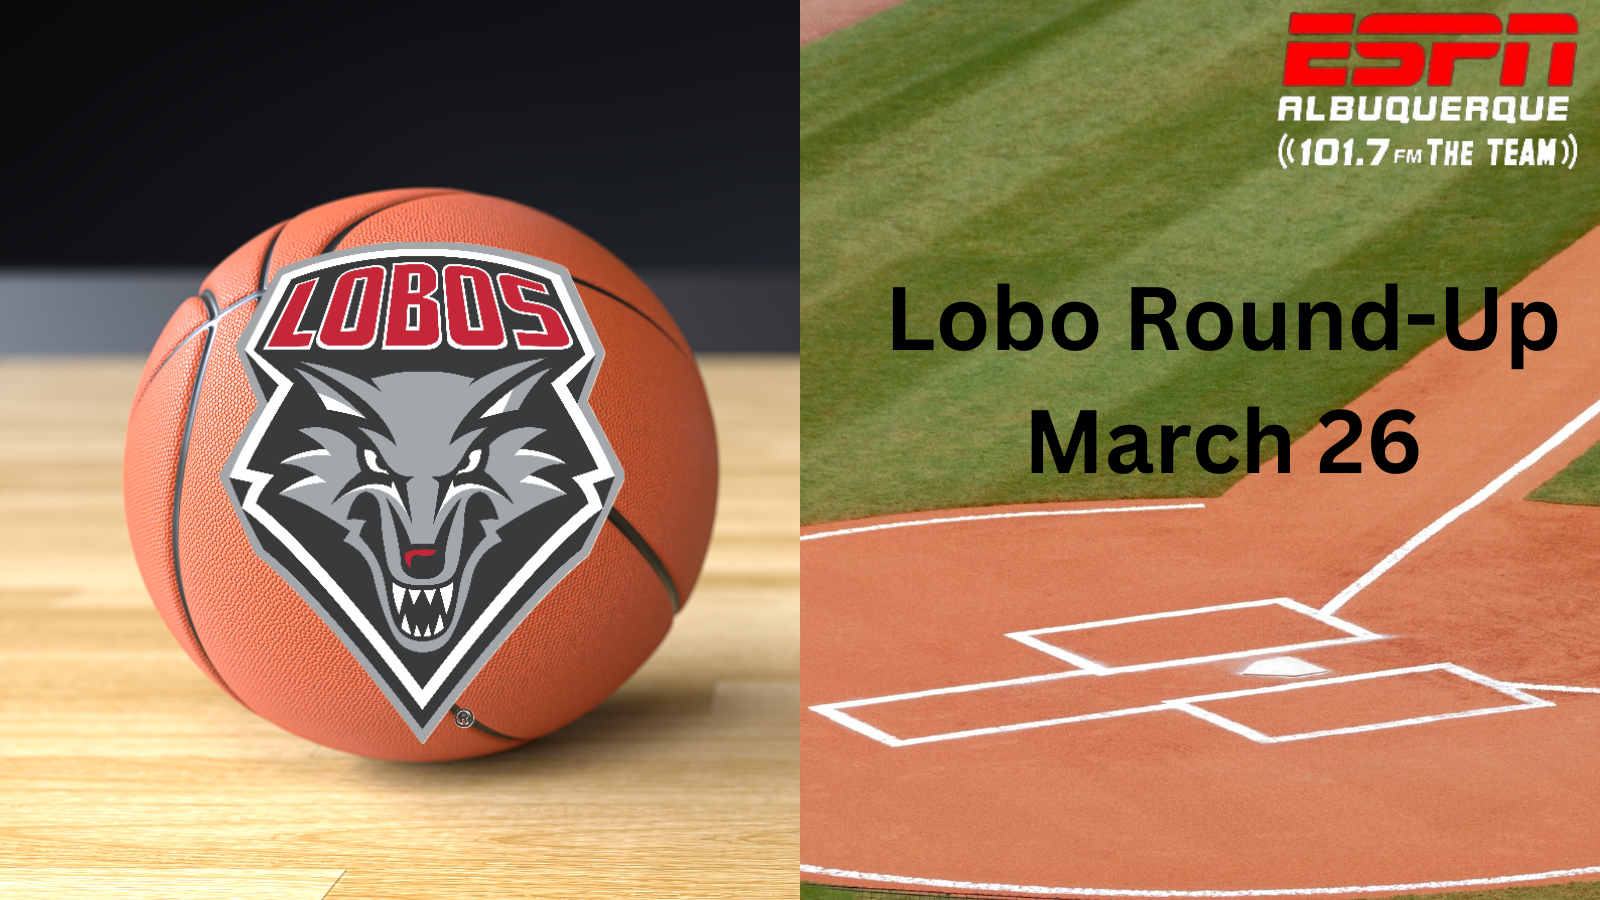 Lobo Round-Up: Victories, Freshman Standouts, and a Season Ends